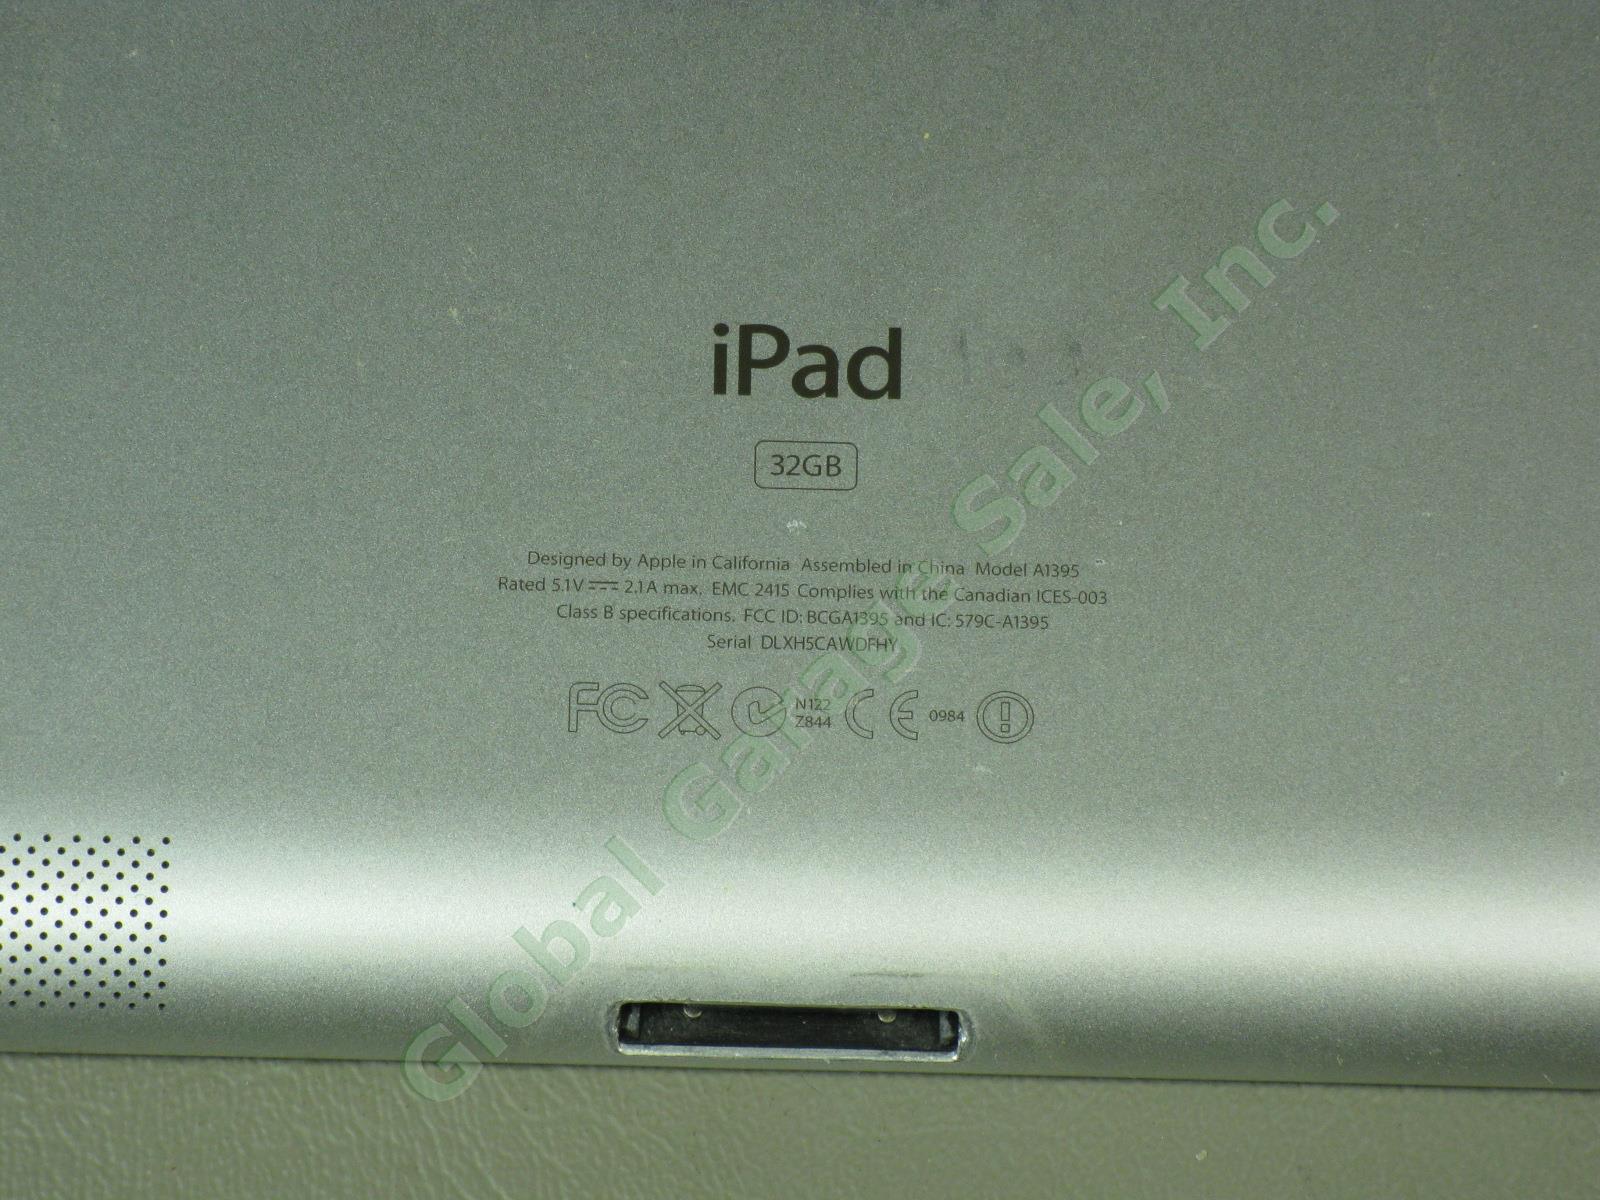 Apple iPad 2 Tablet 32GB Wifi 1 Owner Just Reset Cracked Screen MC770LL/A A1395 7